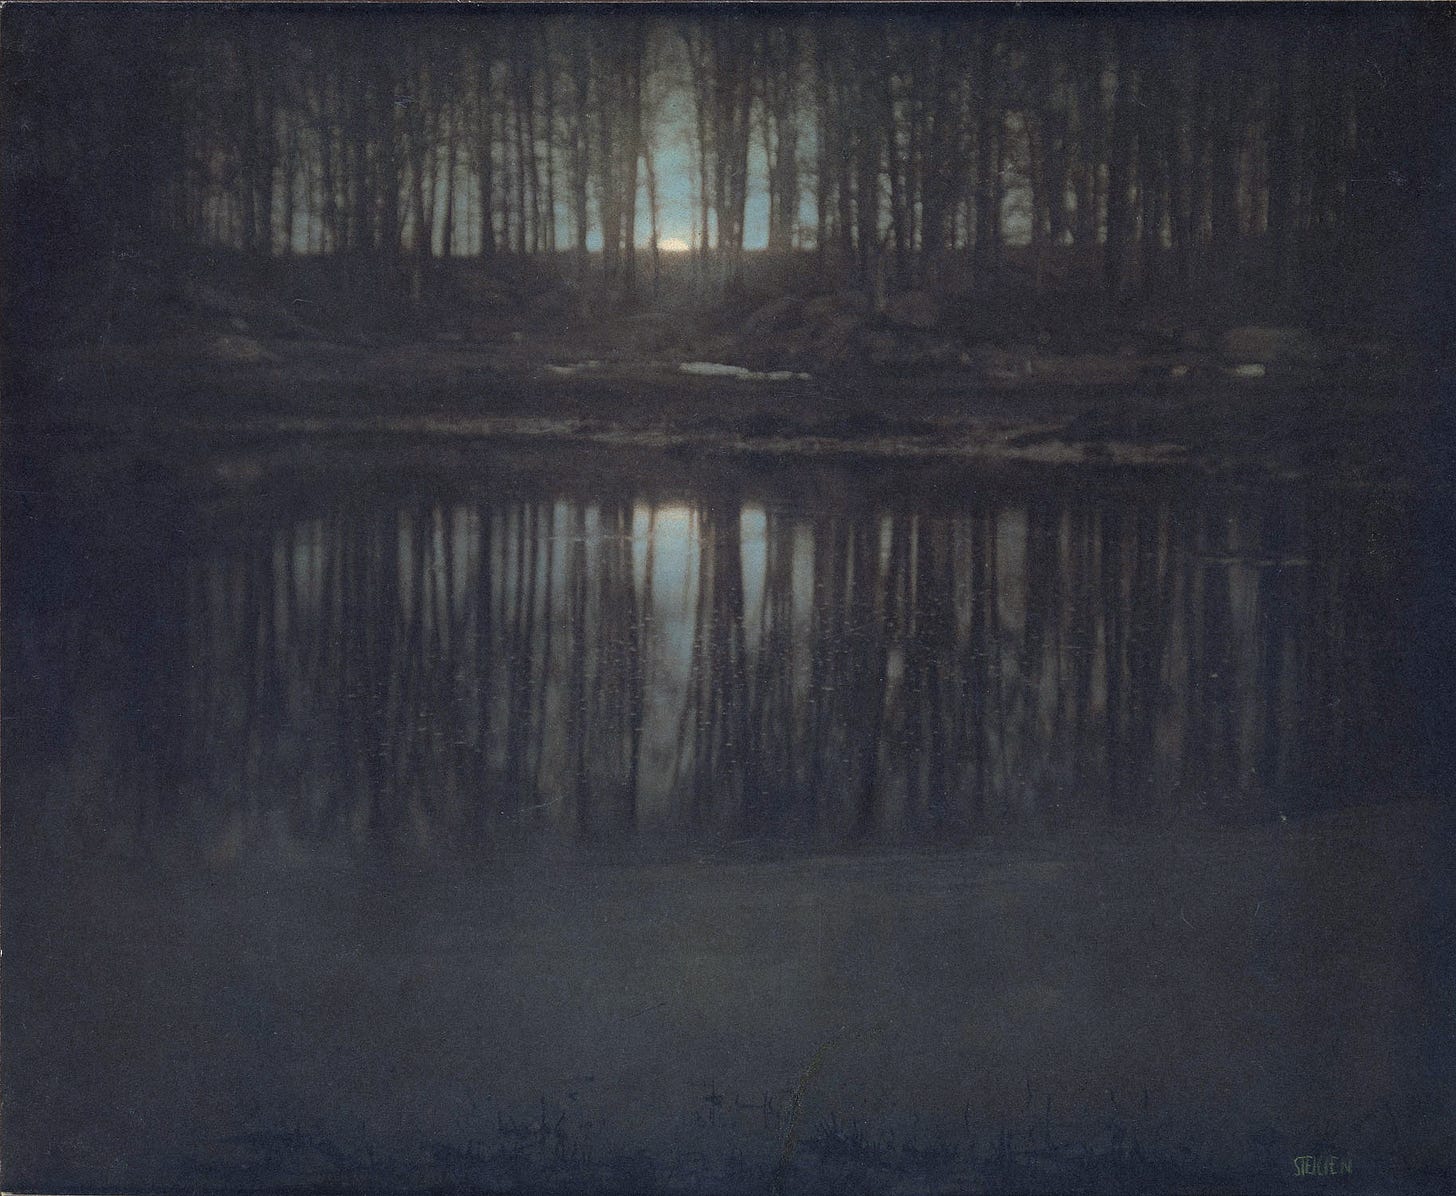 A moonlight pond surrounded by trees.